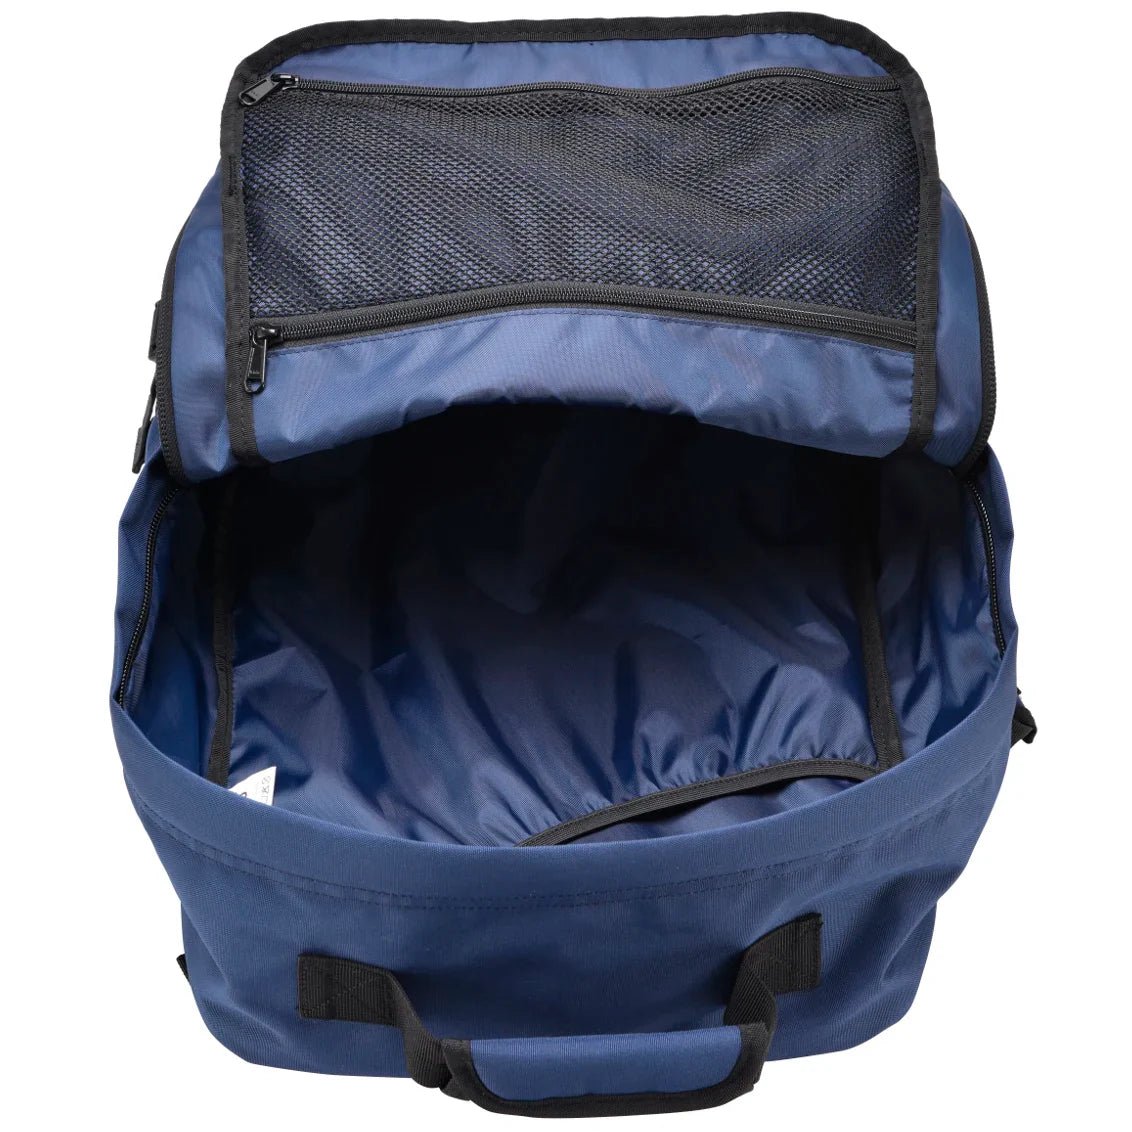 CabinZero Cabin Backpacks Classic 36L Backpack 45 cm - navy